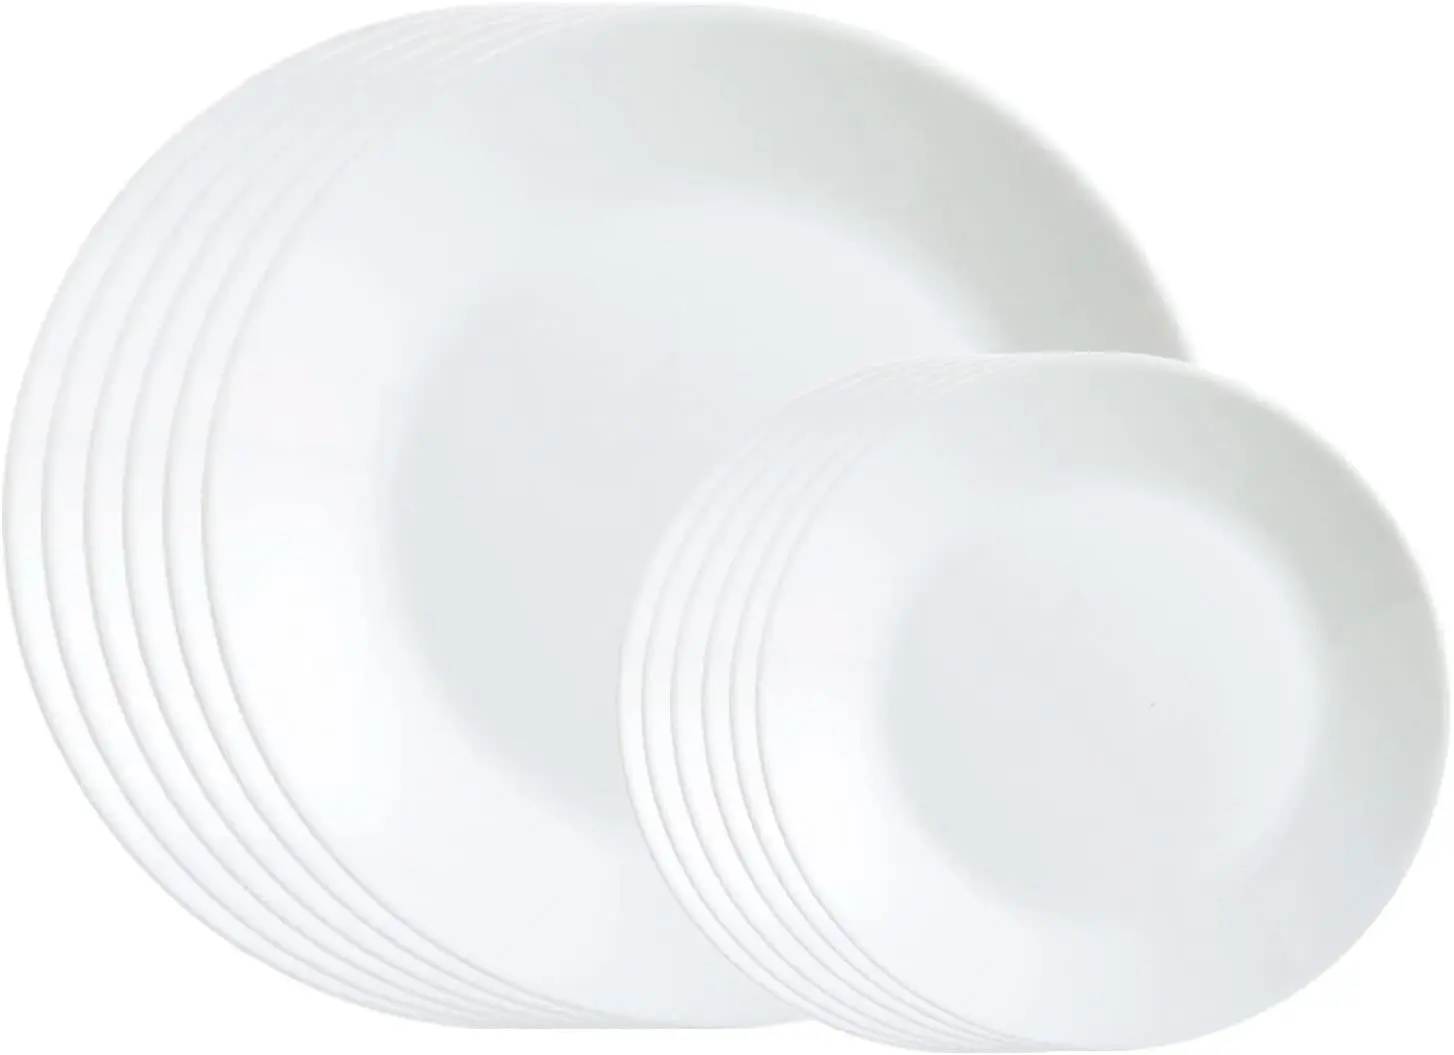 

Frost White Dinner and Bread & Butter Plates - 6 of Each (Total of 12 Plates)